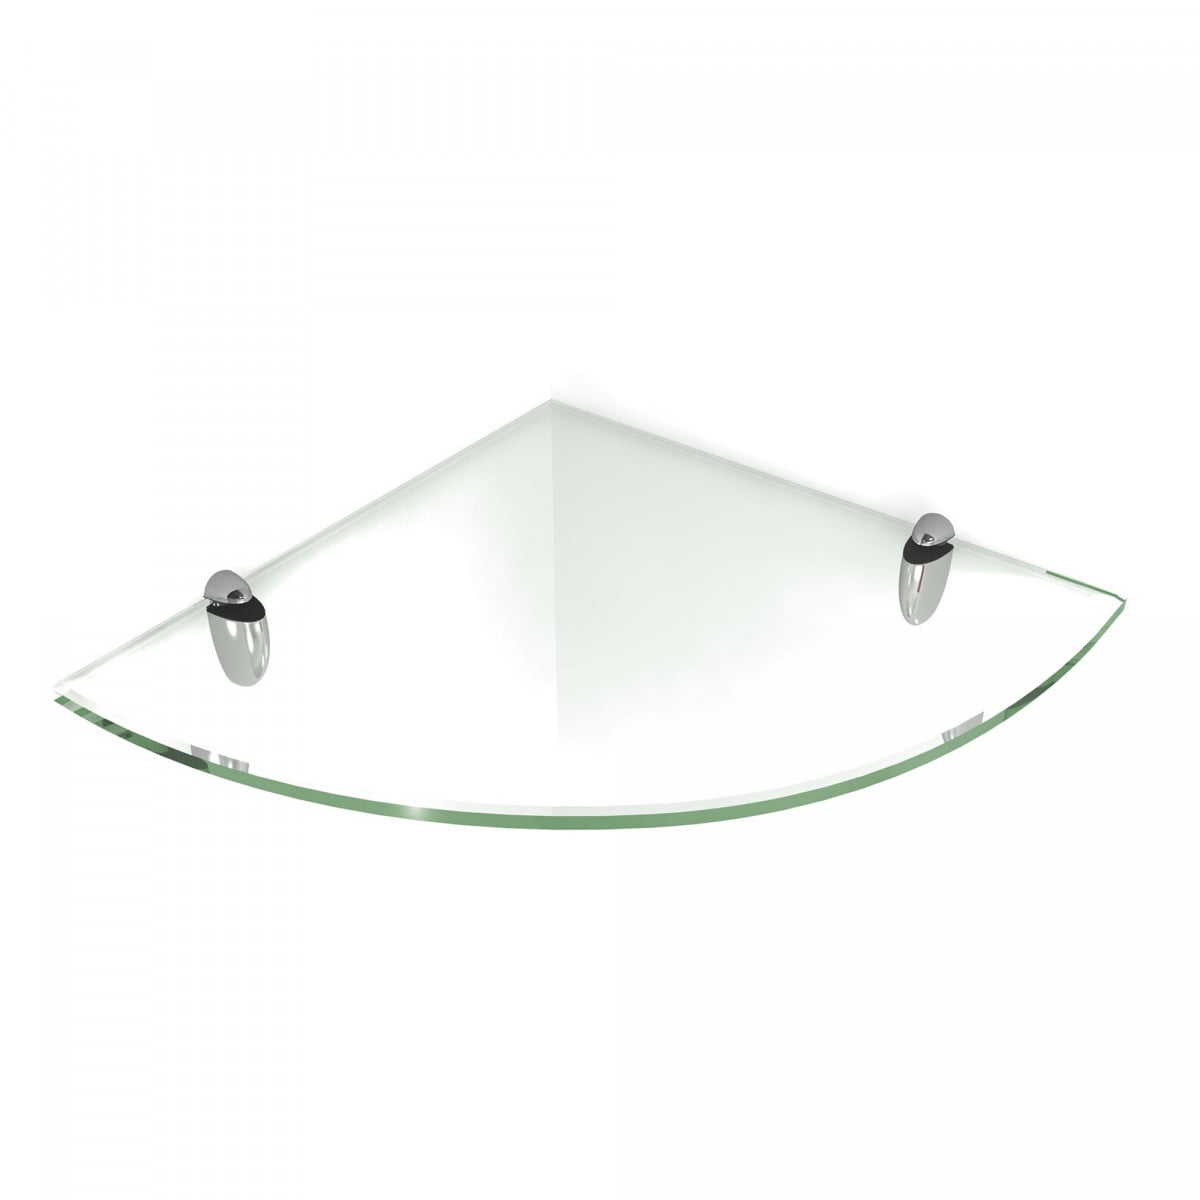 Details about   vidaXL Corner Shelves 2 pcs with Chrome Supports Glass Clear 17.7"x17.7"